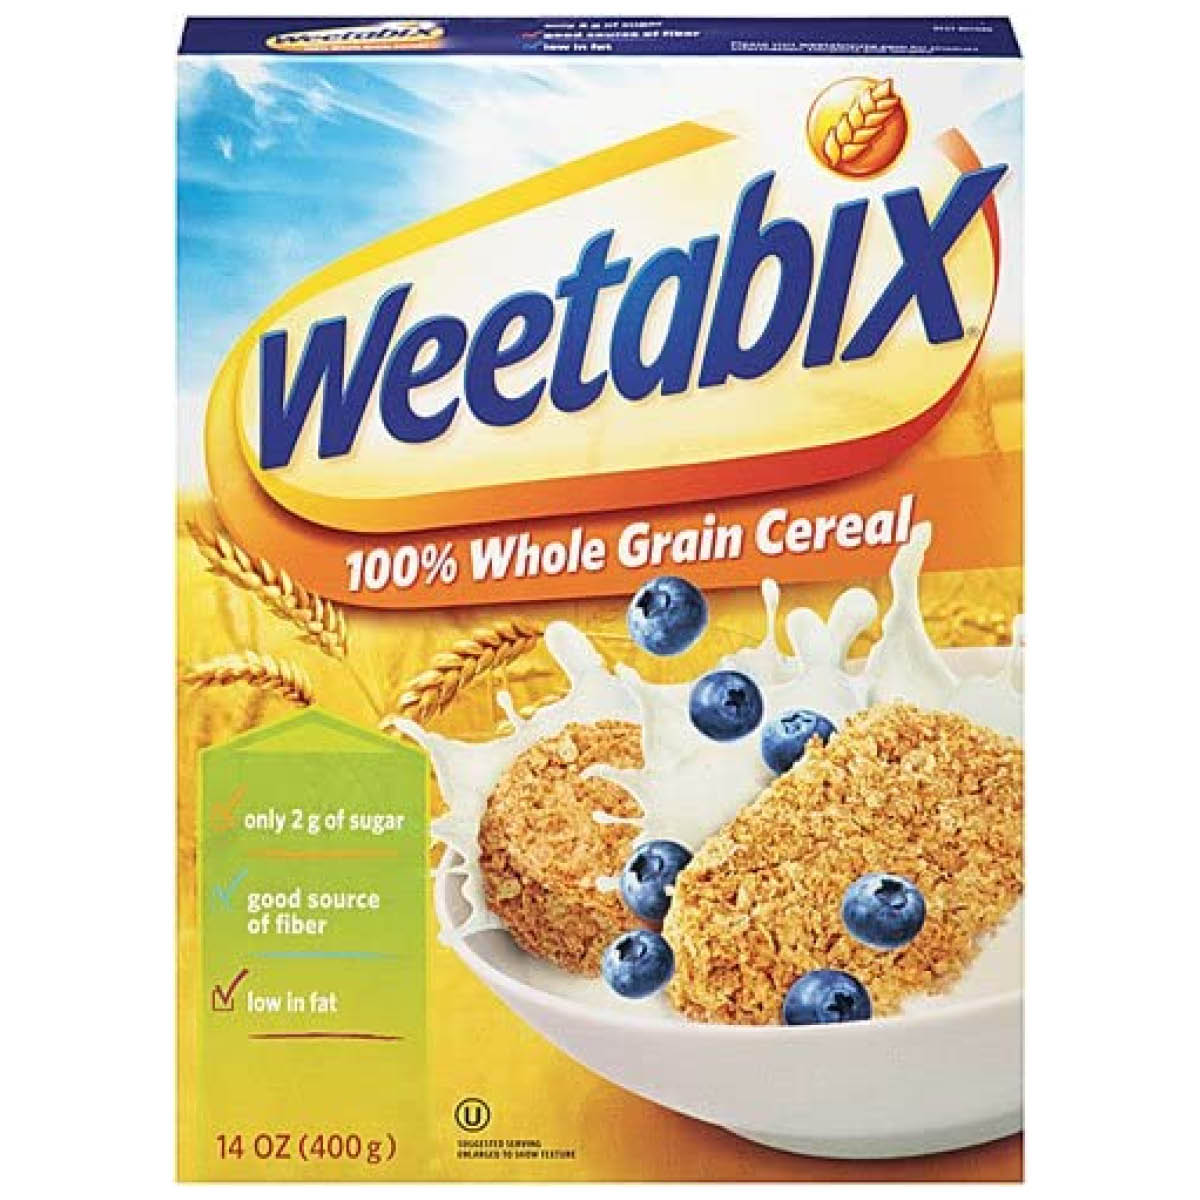 Weetabix Whole Grain Cereal, 400G